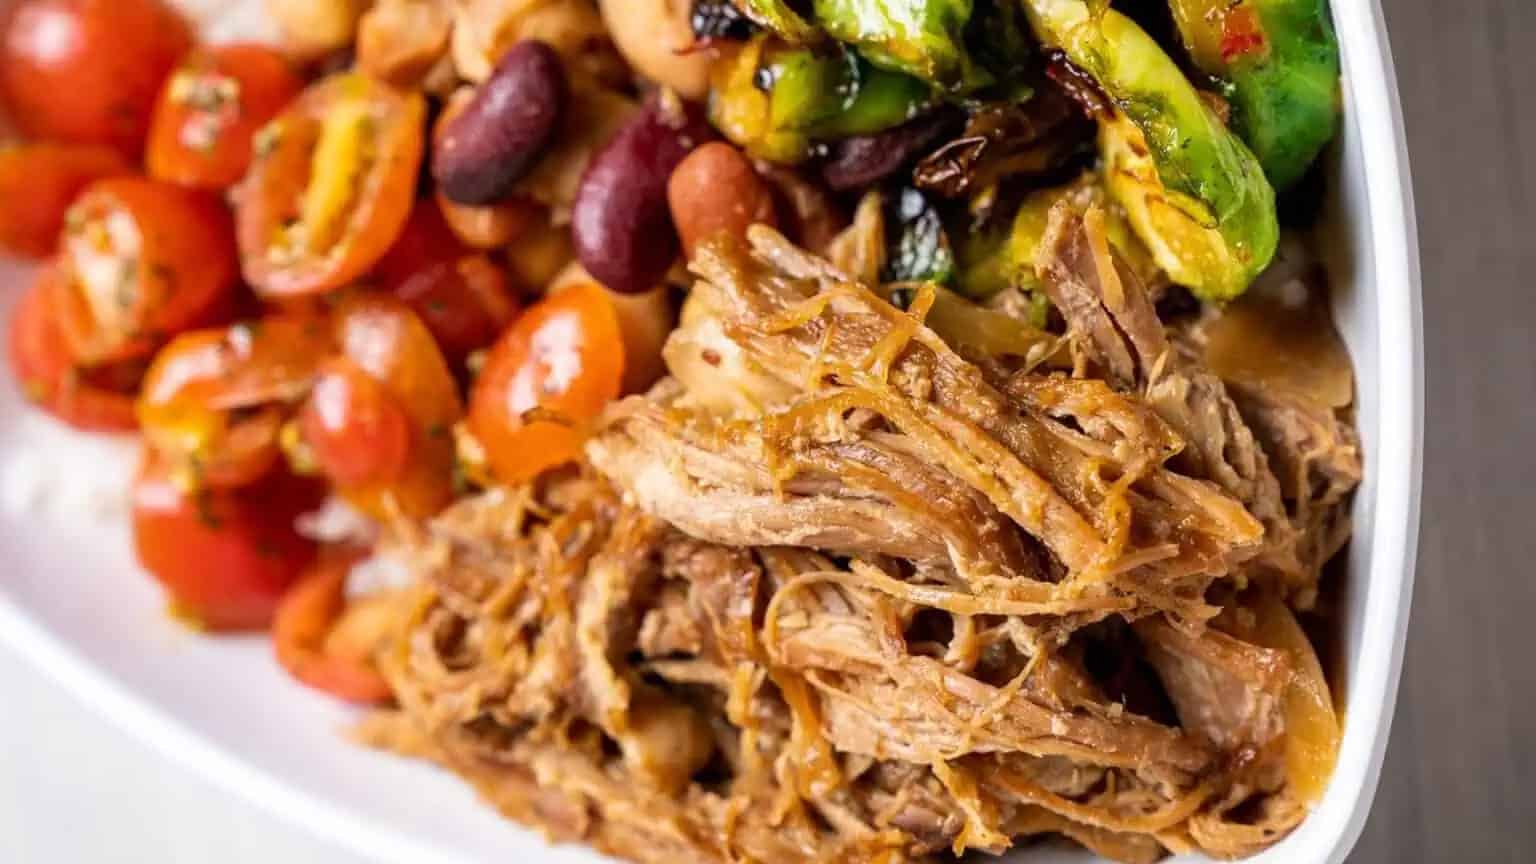 shredded pork, beans, tomatoes, veggies, and more in a bowl from Bolay